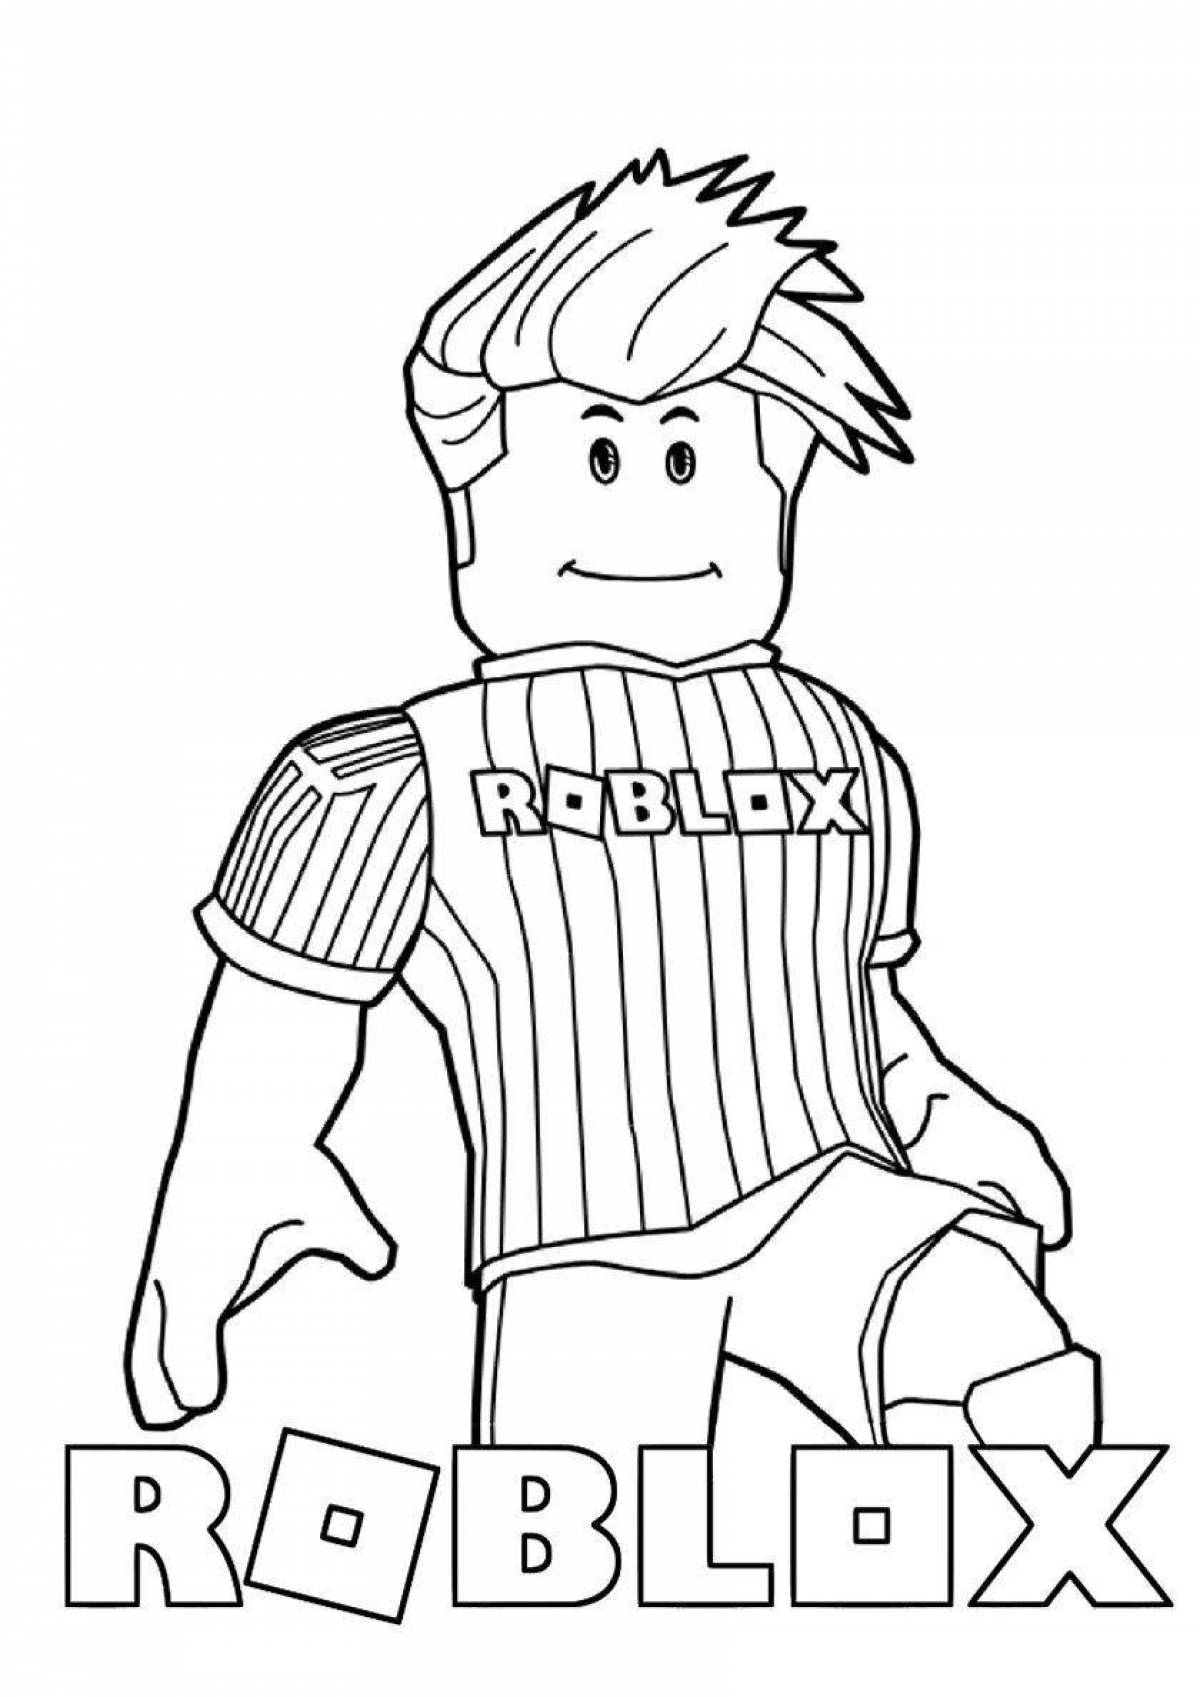 Roblox cute rainbow friends coloring book for boys